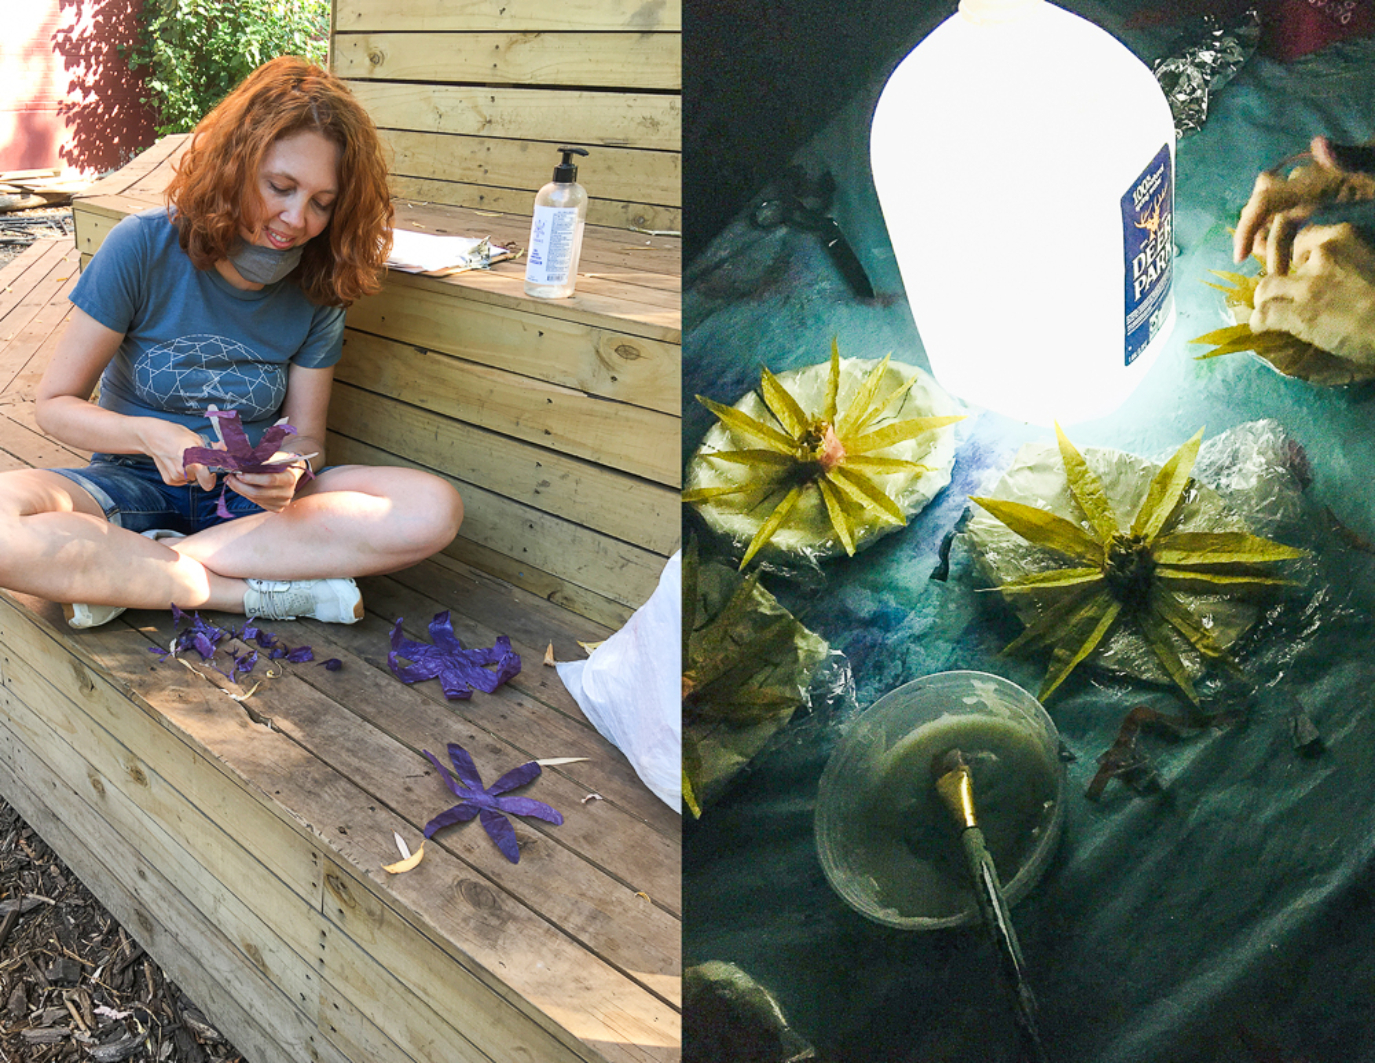 This is a split image: Left: One volunteer with red hair and a blue shirt sits crosslegged and puts together purple flowers. She sits on a wood bench. Right: It's nighttime and there is a glowing light bottle surrounded by yellow flowers handmade. There is a faded pair of hands in the top-right putting the flowers together.